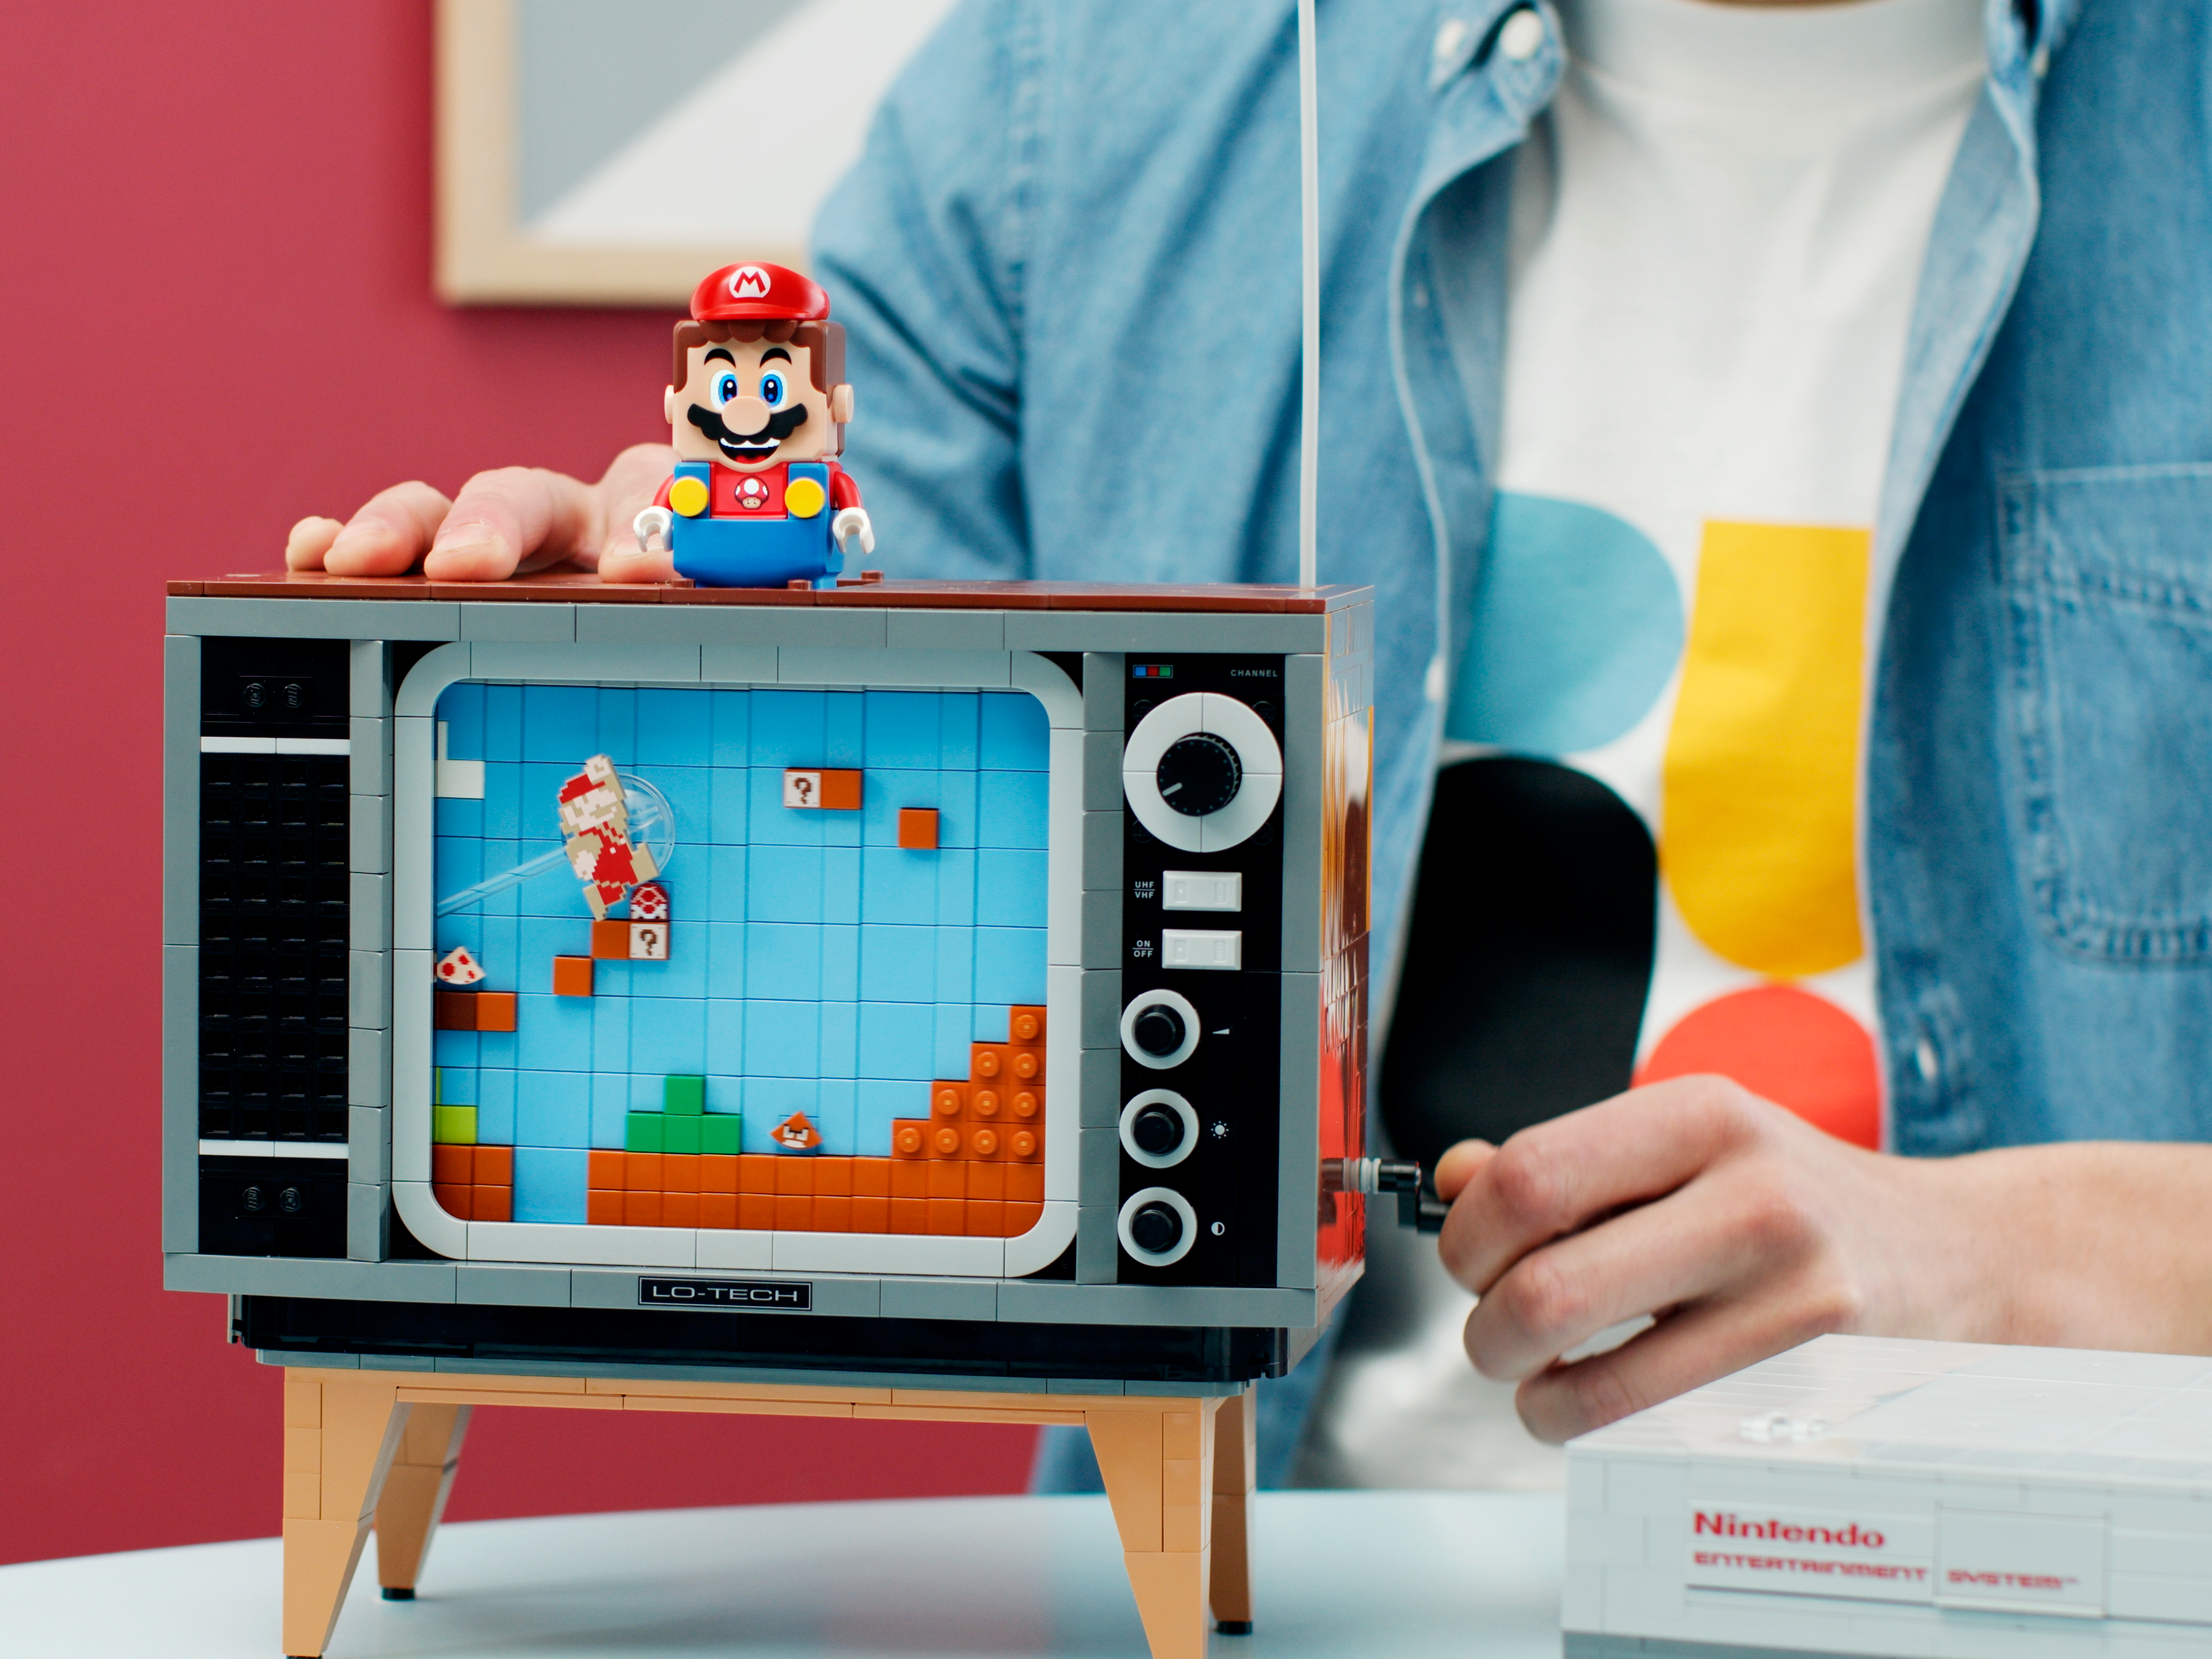 Toy Review: LEGO Super Mario - The First Interactive LCD LEGO